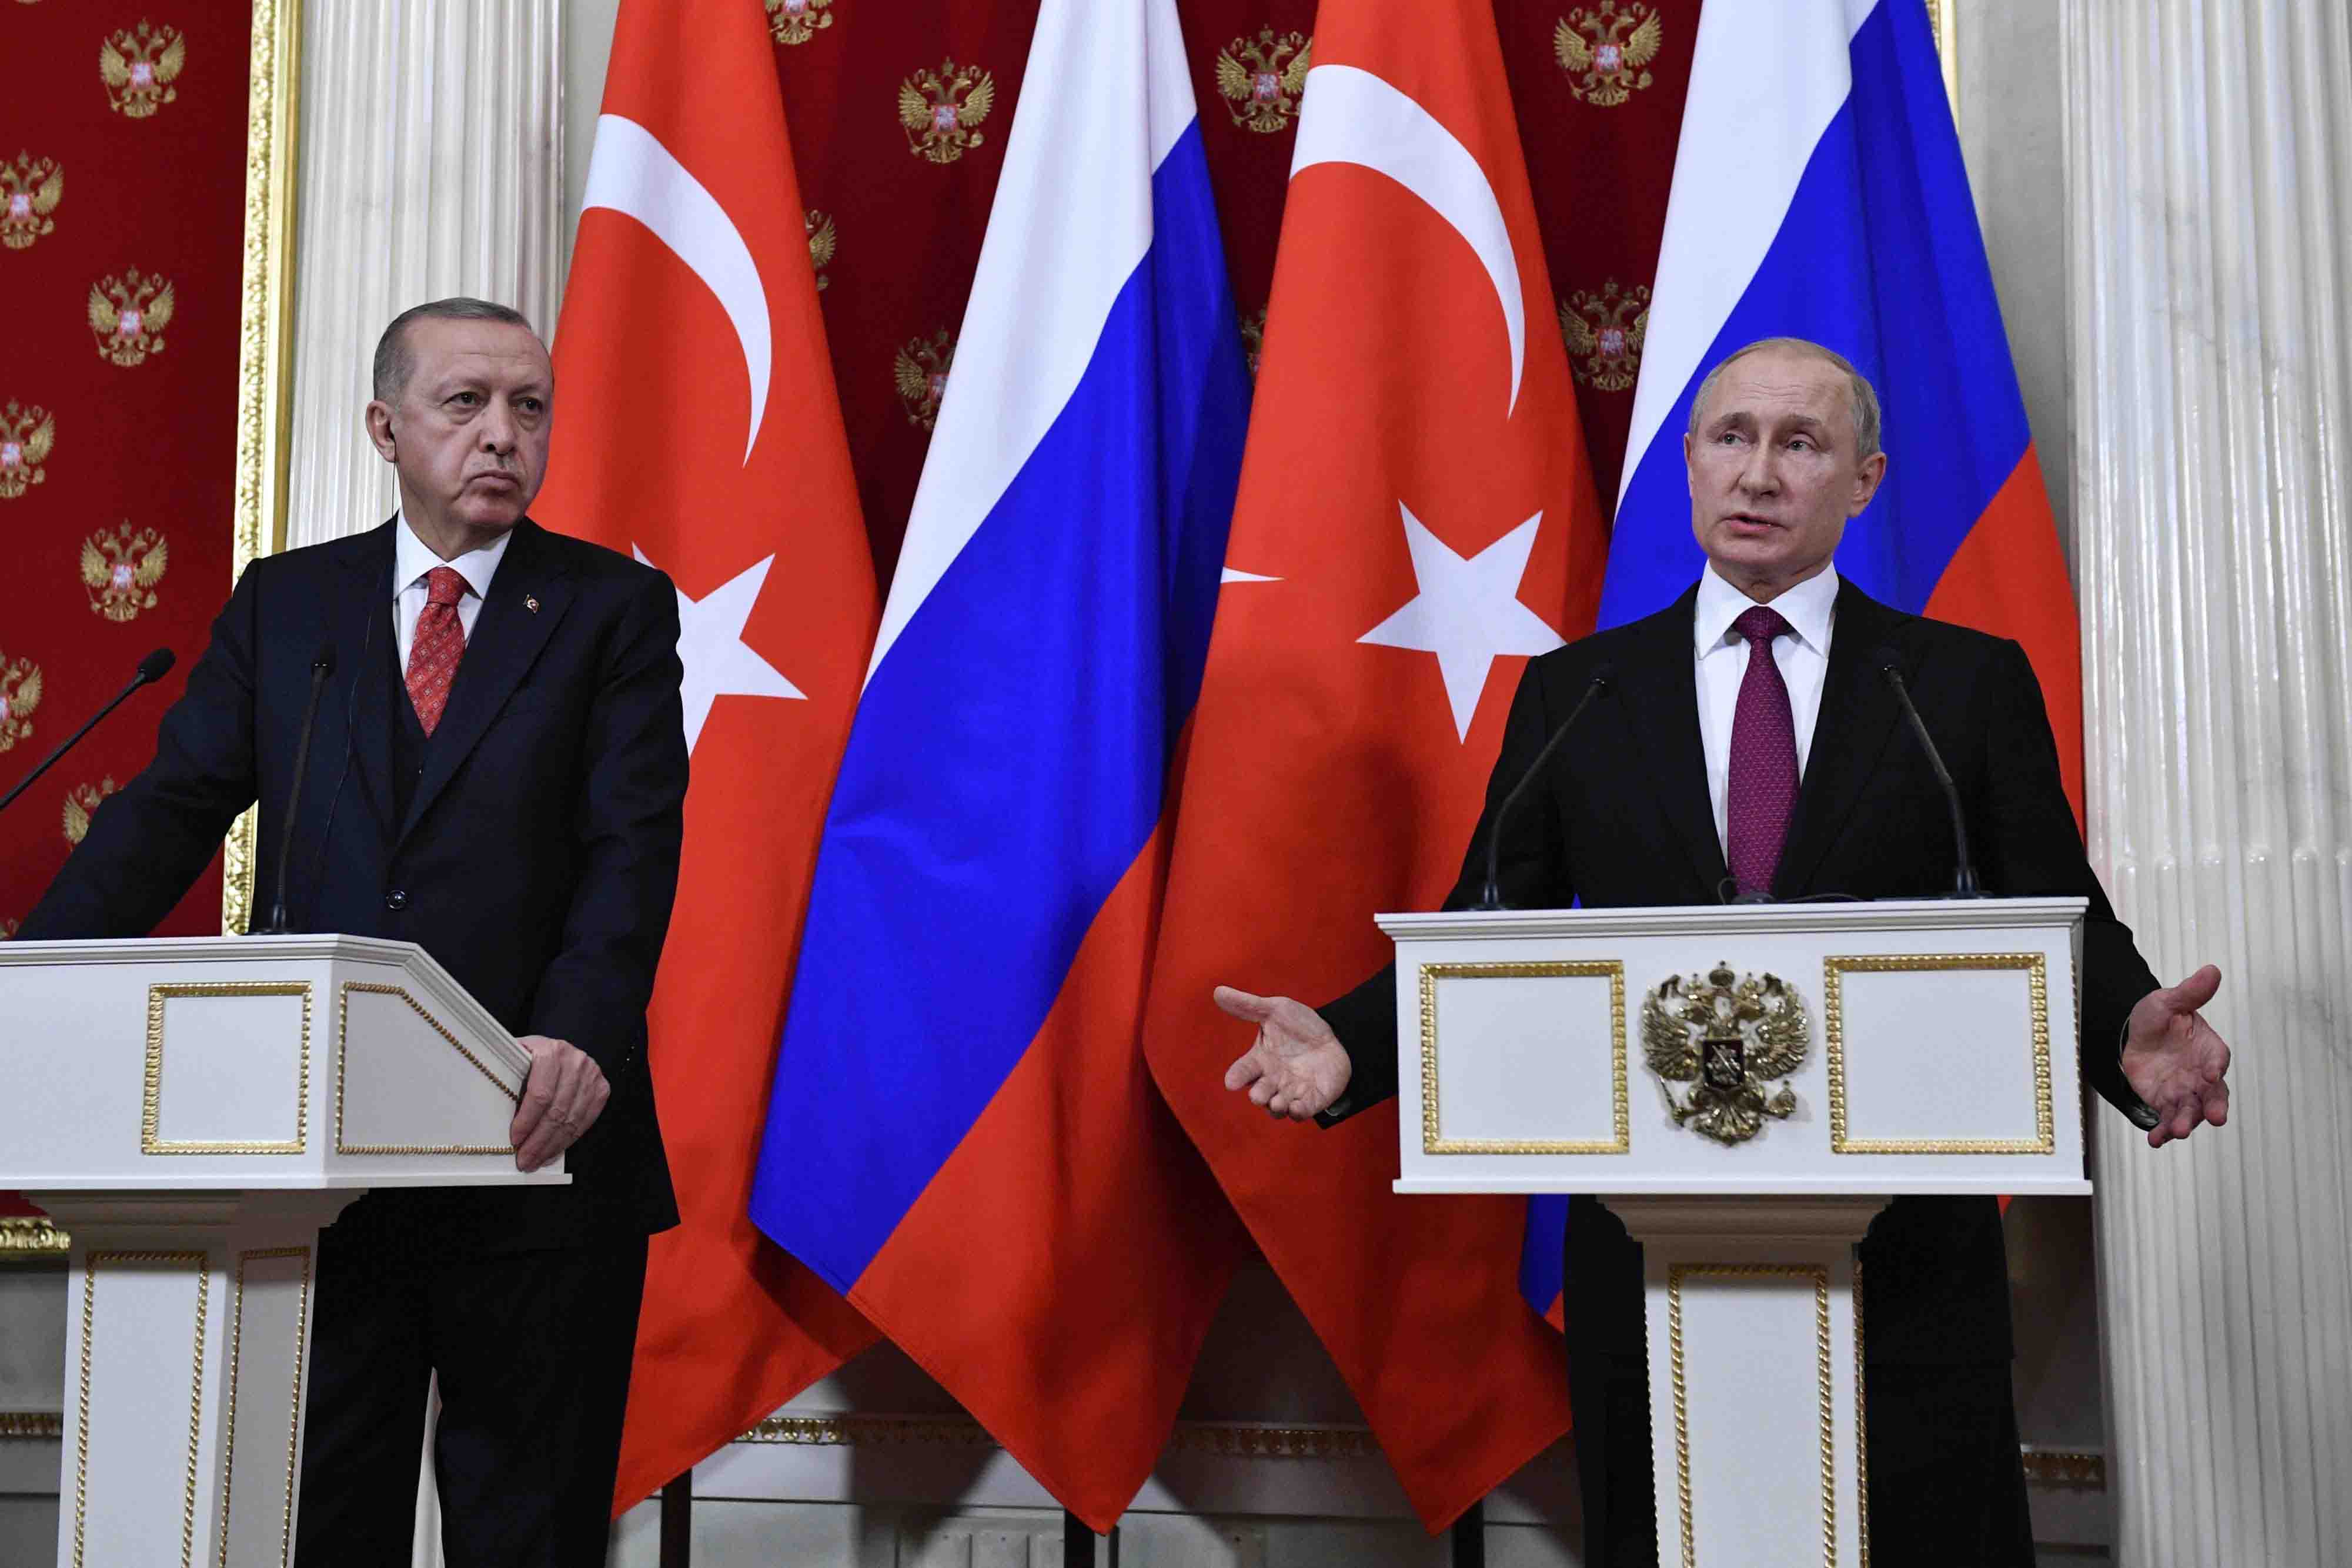 Turkey's Defence Minister Hulusi Akar said Russian forces would begin patrols on the border region outside Idlib and Turkish forces would start patrols inside the zone.